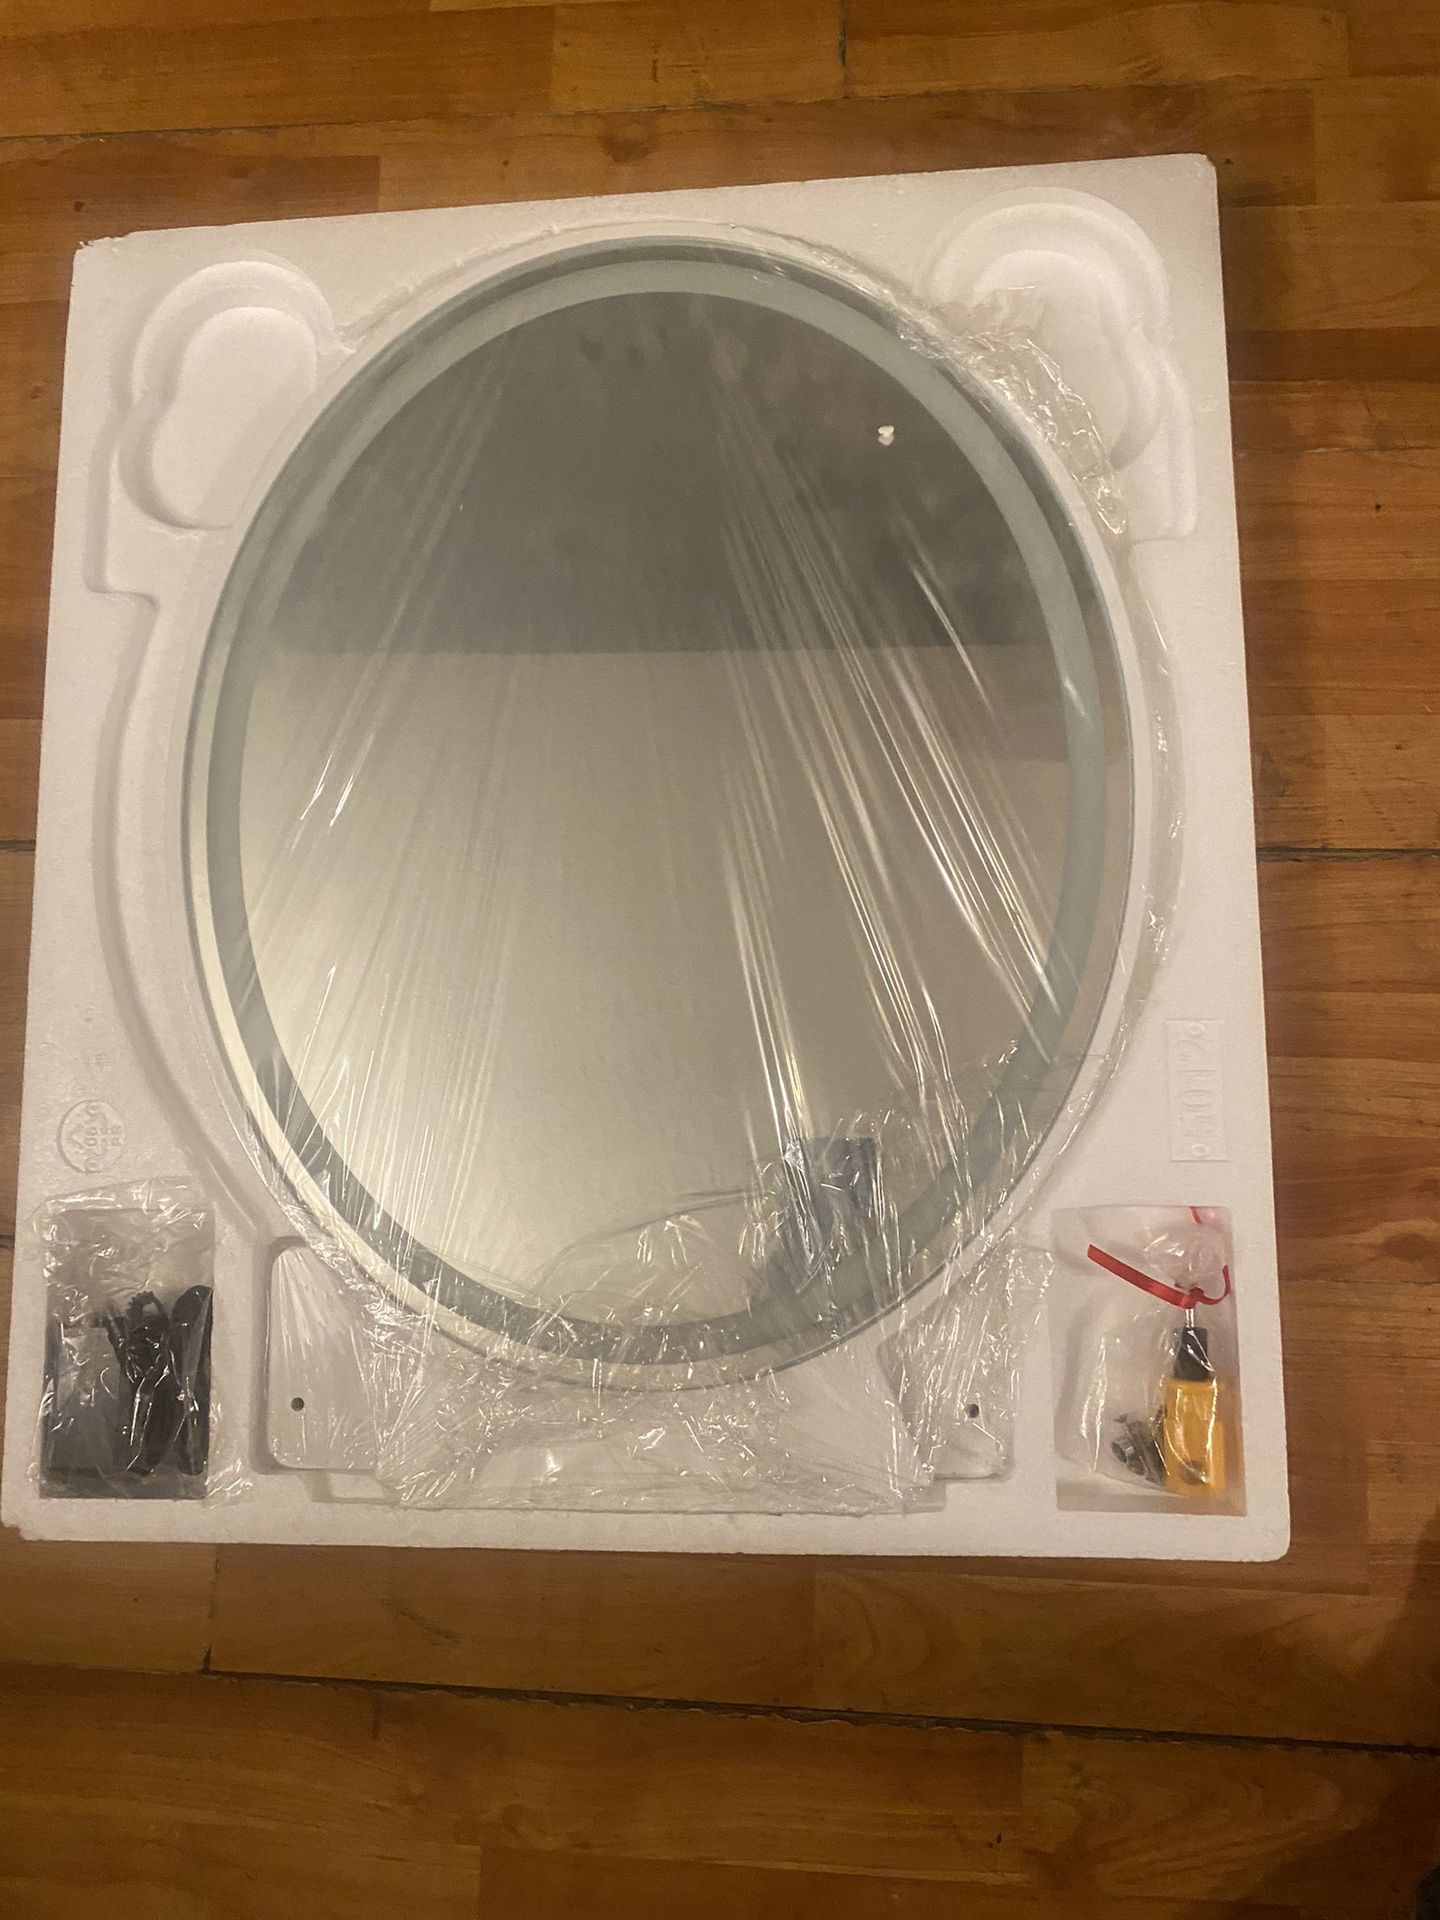 22 Inch Make Up Mirror With Lighting And Remote Control. 